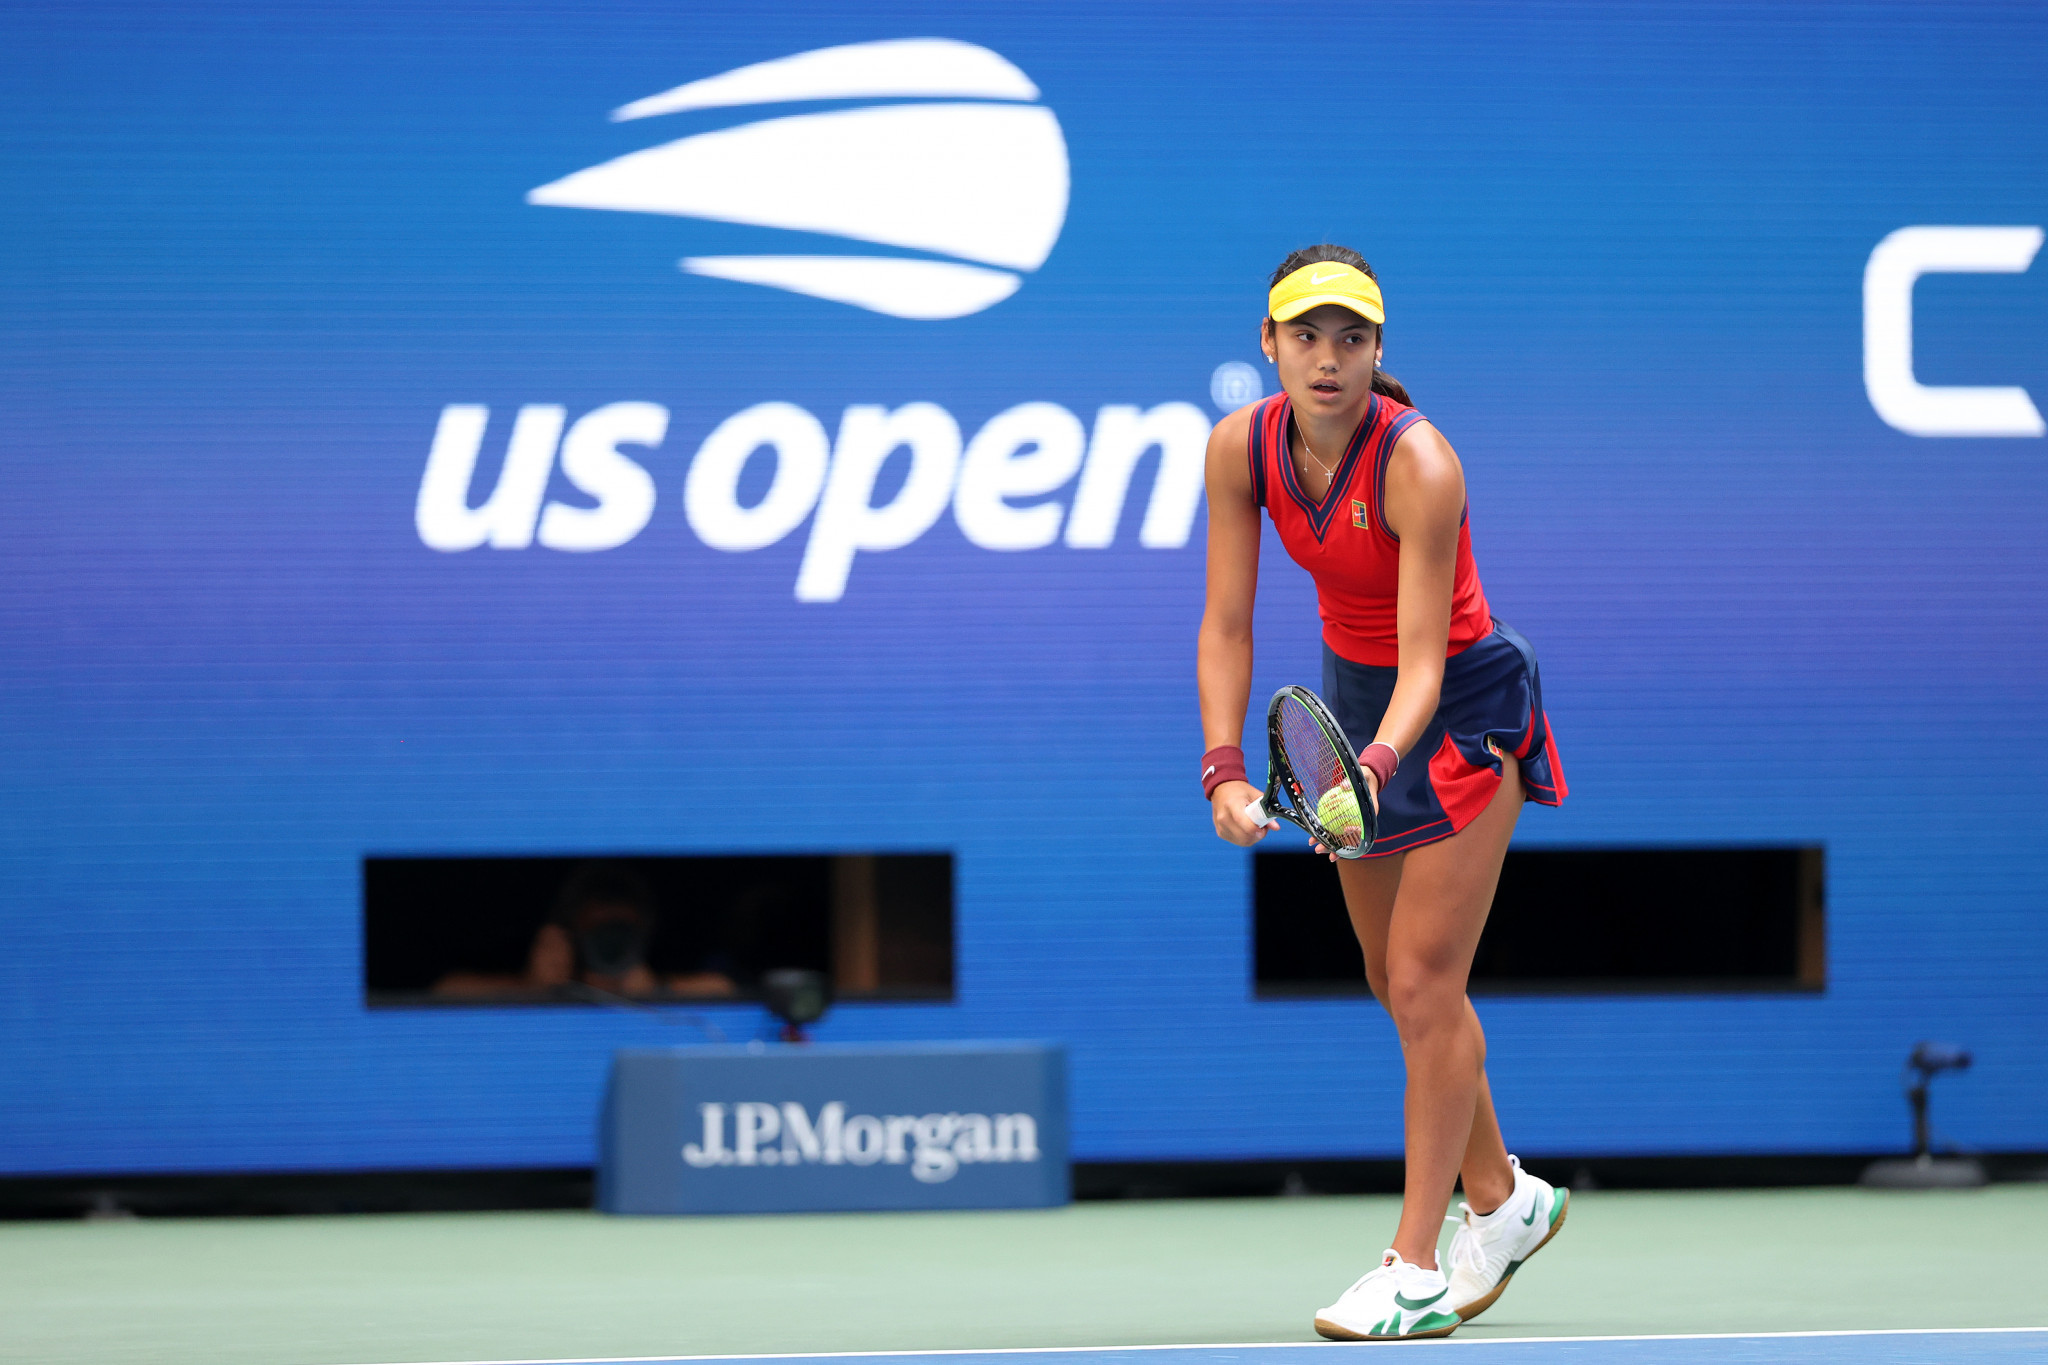 British qualifier Emma Raducanu continued her remarkable run in New York as she reached the quarter-finals ©Getty Images